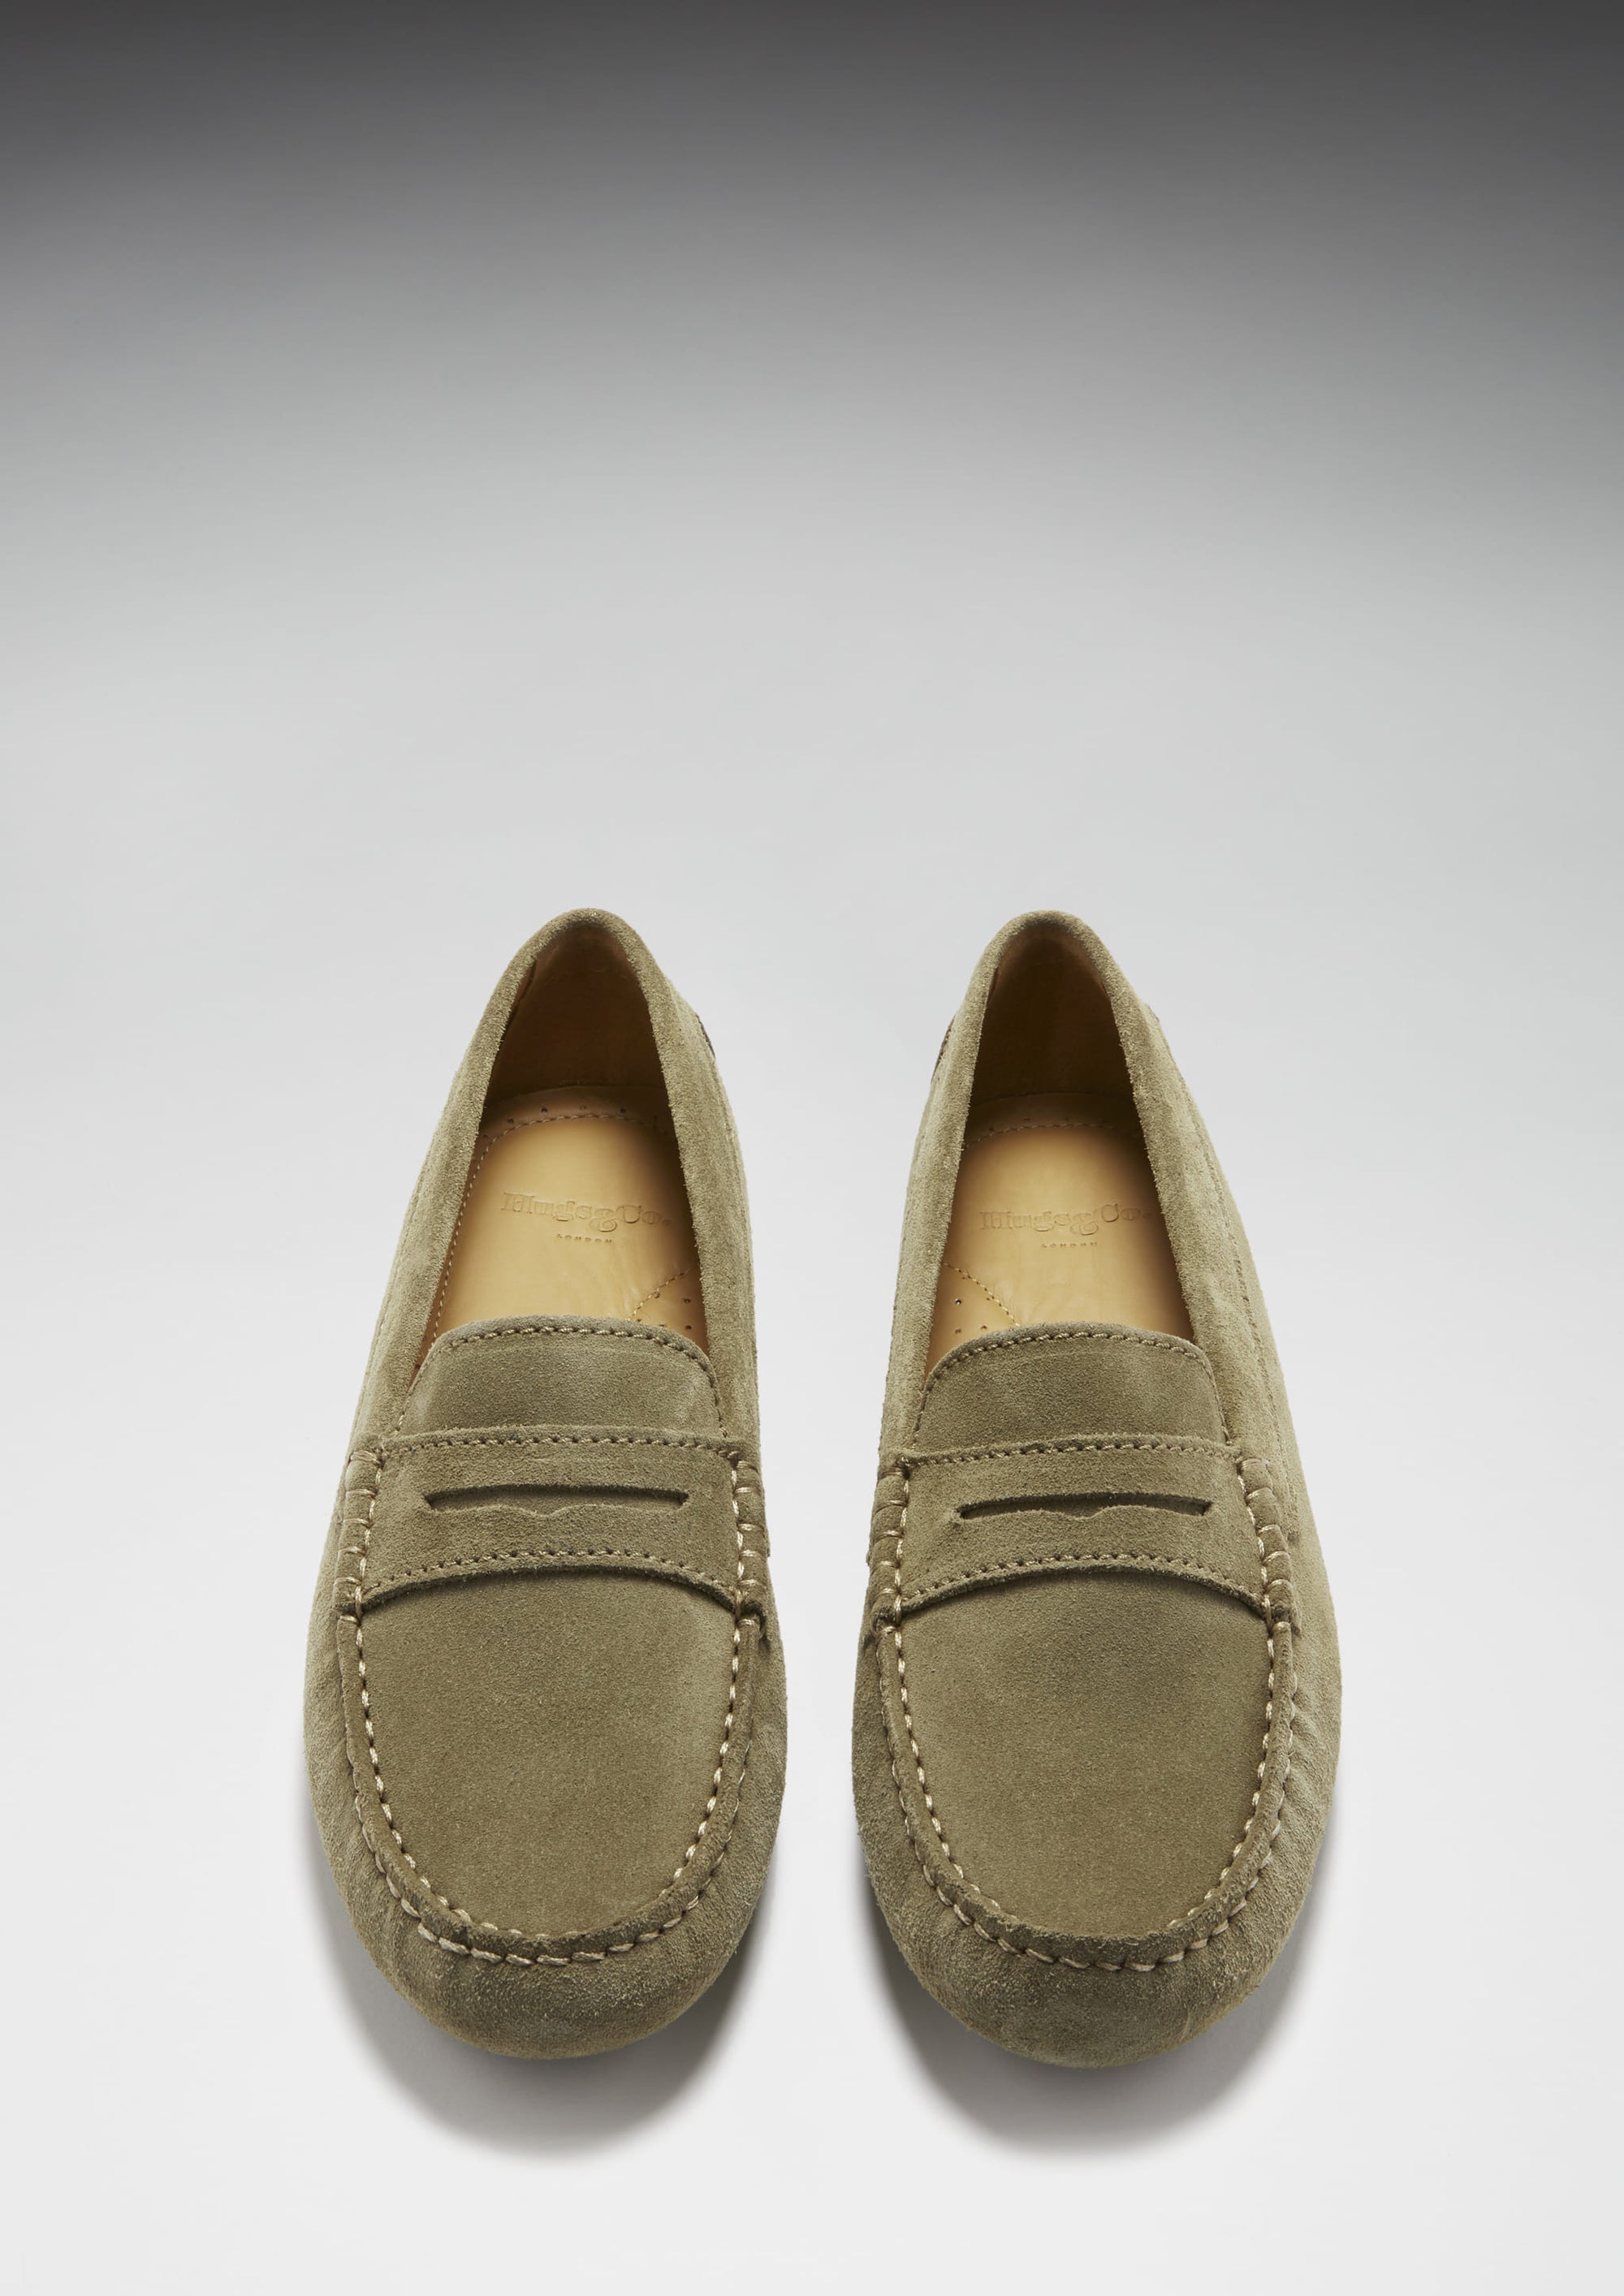 Women's Penny Driving Loafers, truffle suede